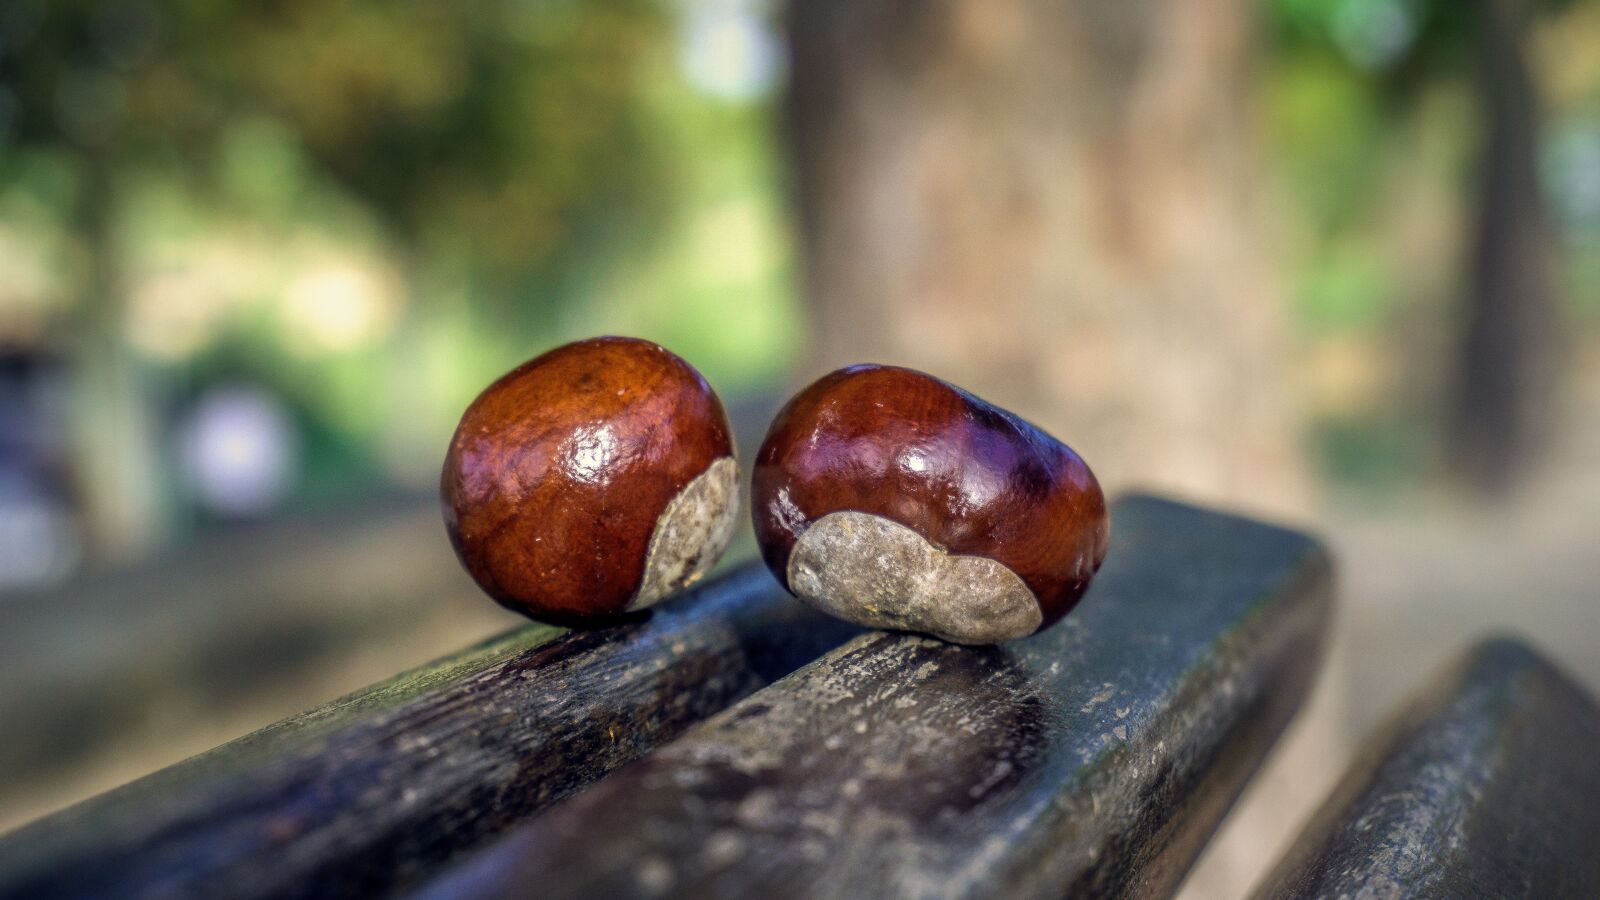 Sony a6000 sample photo. Chestnuts, fruits, brown photography